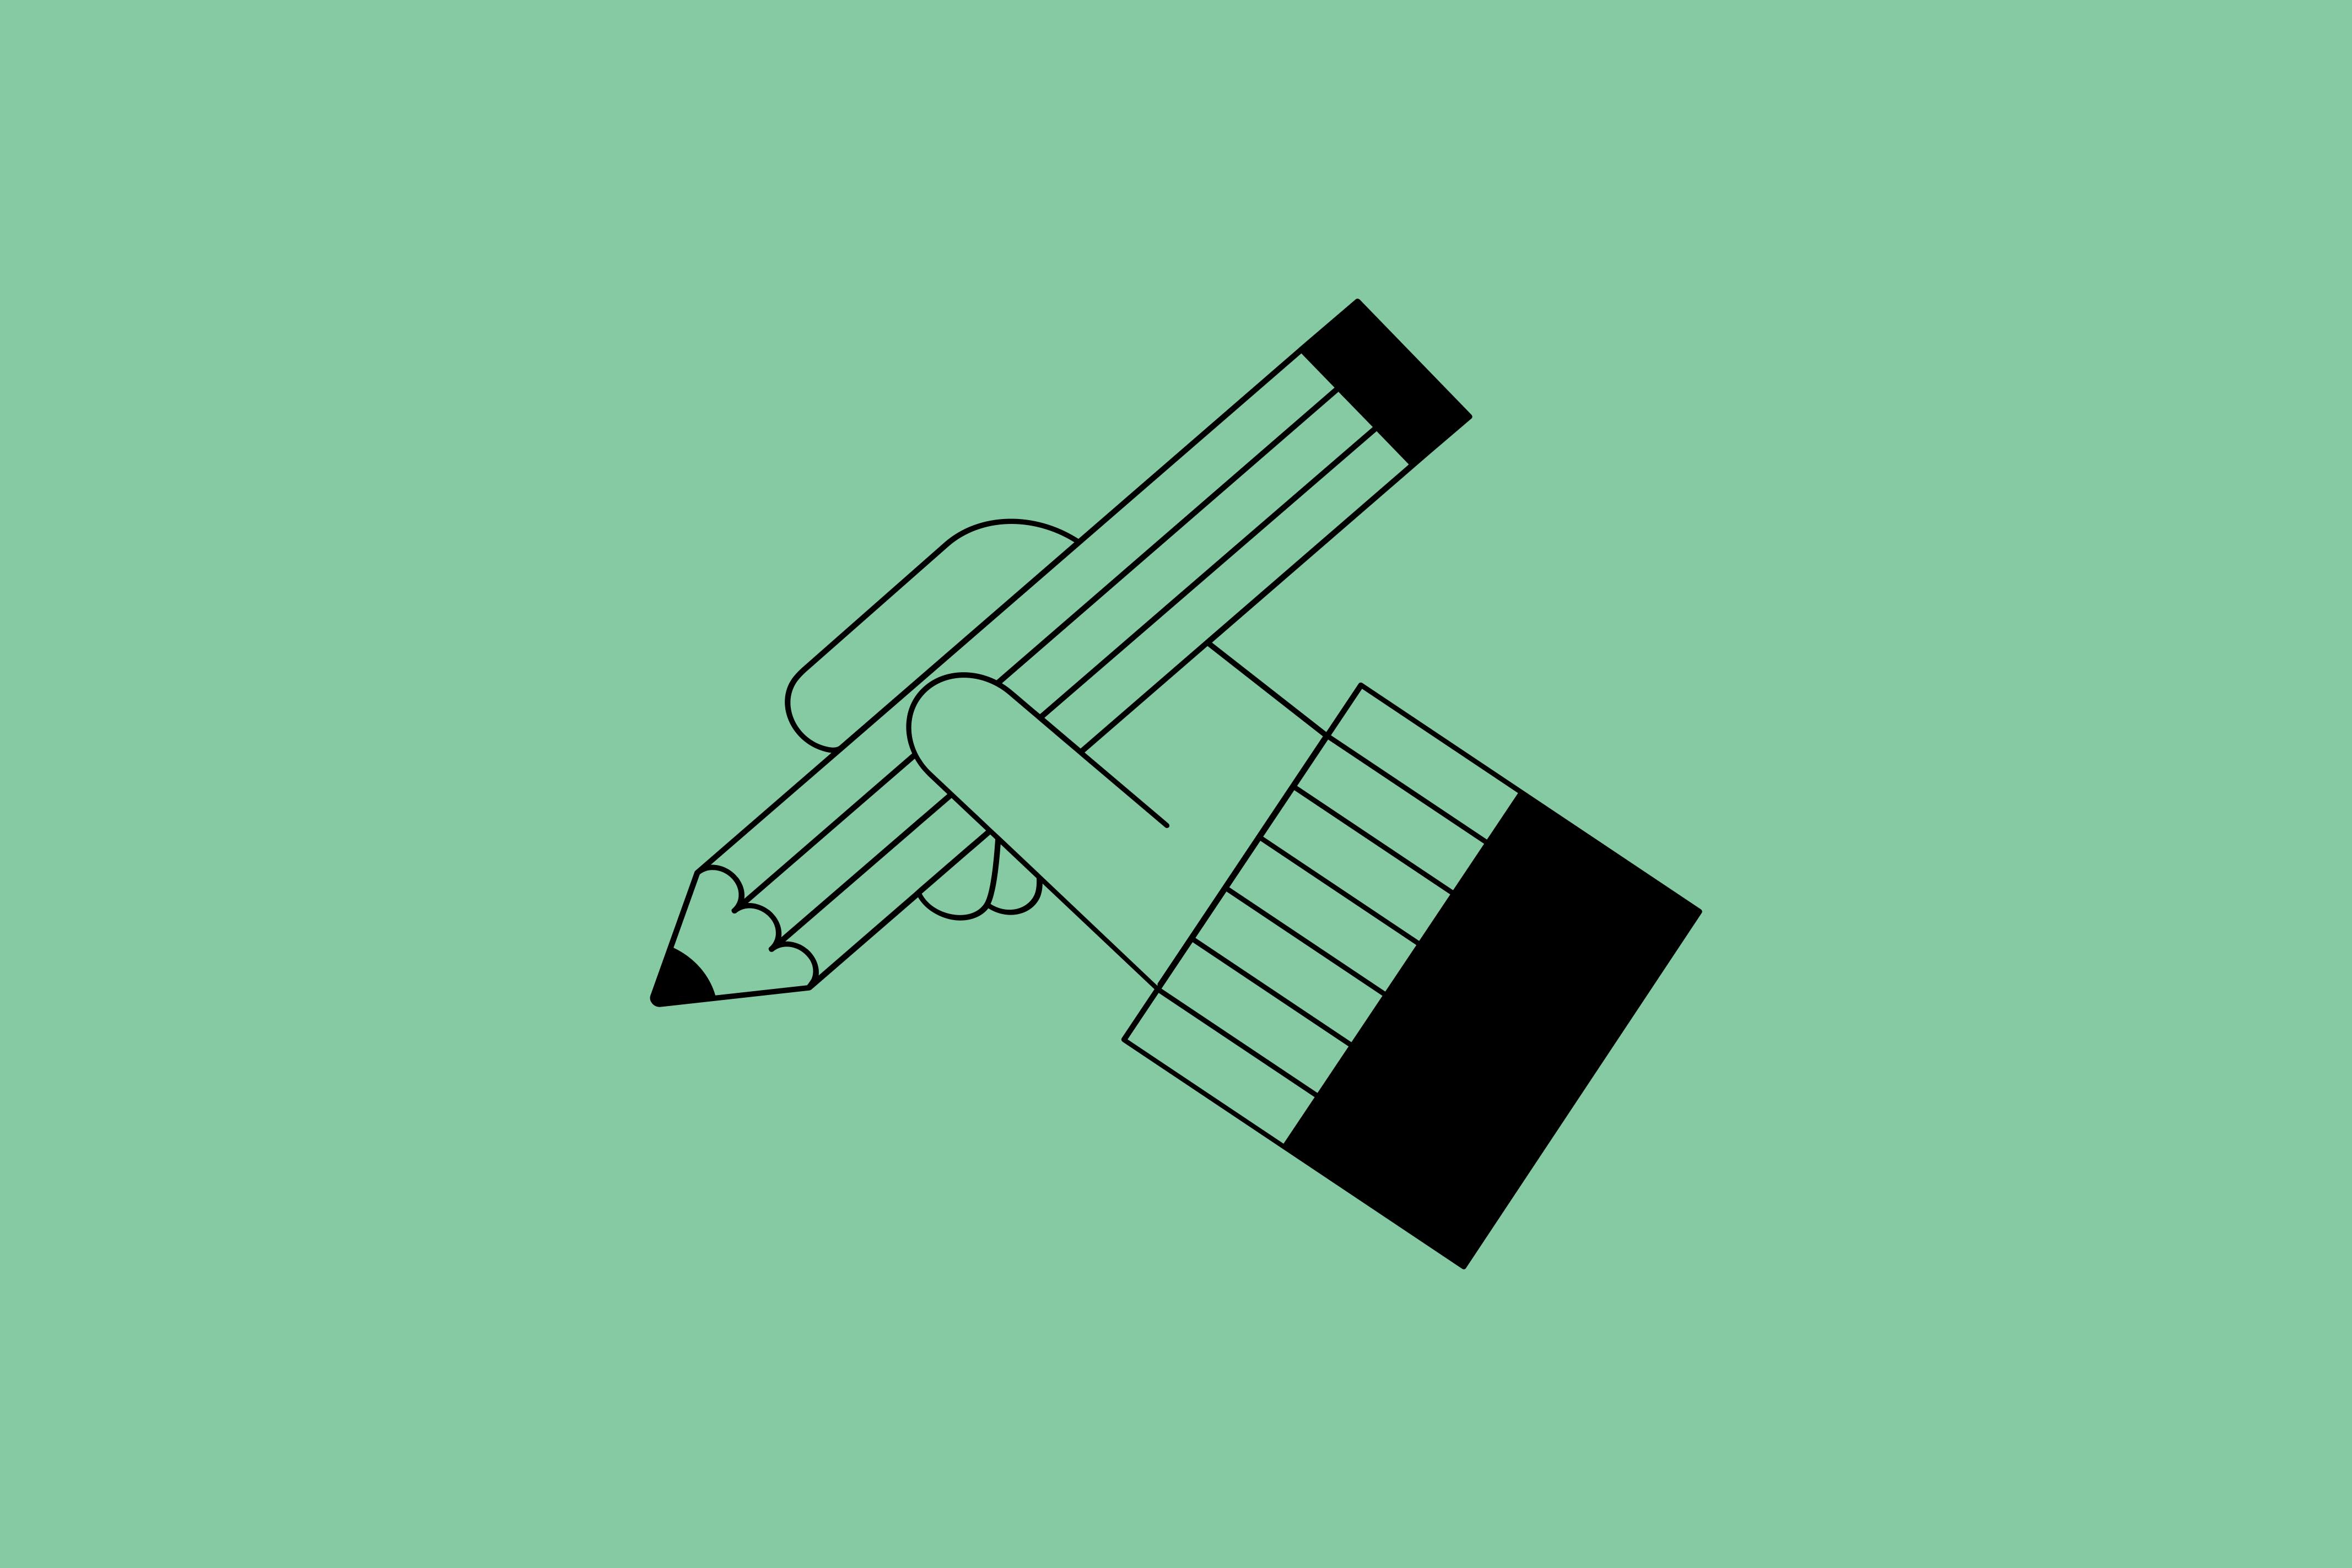 Against a mint green background is an illustration with black lines. Shown is a hand holding a pen.